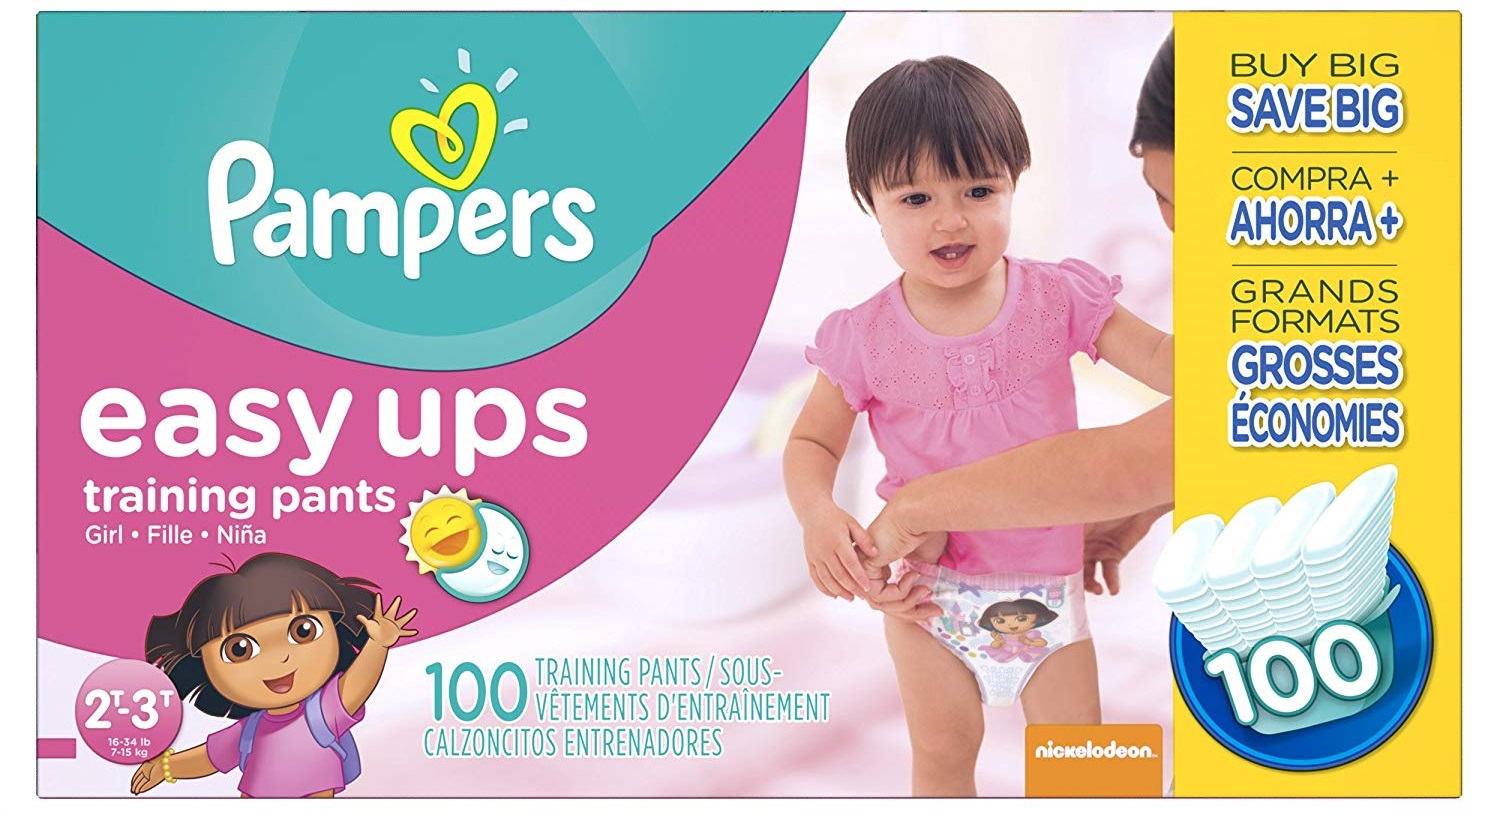 A Complete Review of Pampers Pam 2766 Easy Ups Training Pants, 2T3T (Size 4), (Pack of 100) Diapers for Girls